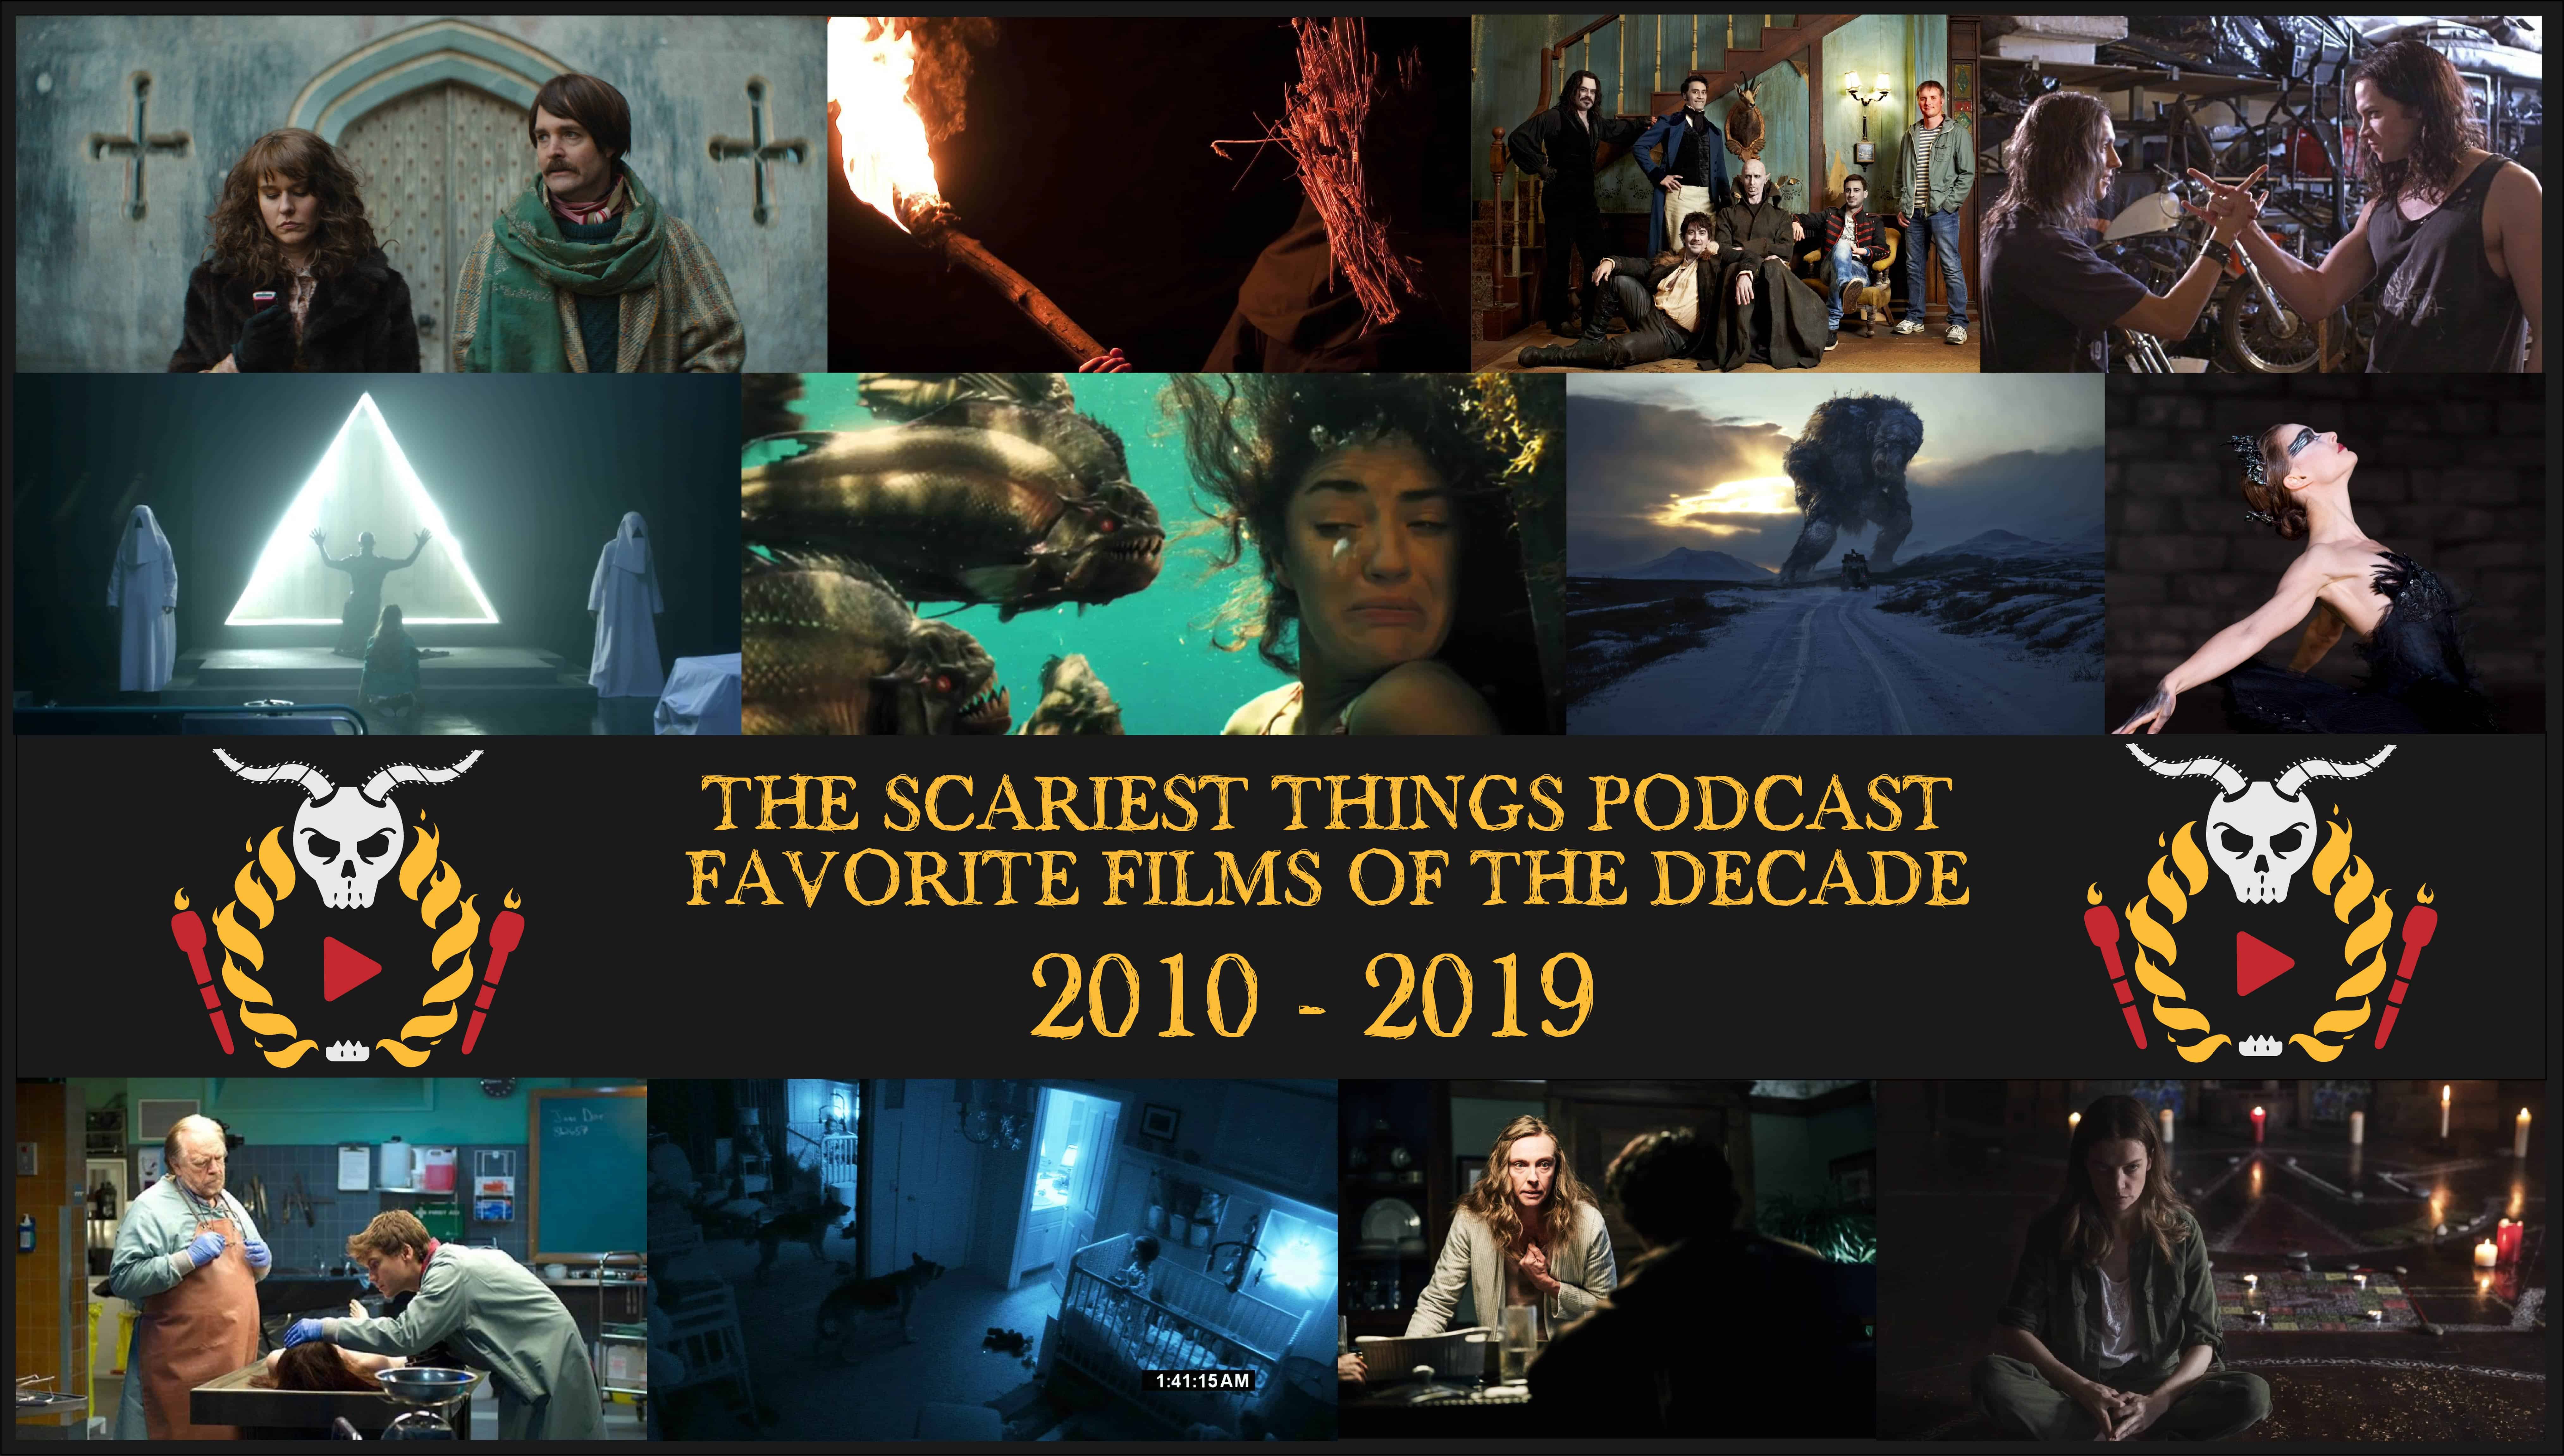 The Scariest Things Podcast Episode LXXXV: Our Favorite Horror Movies of the Decade